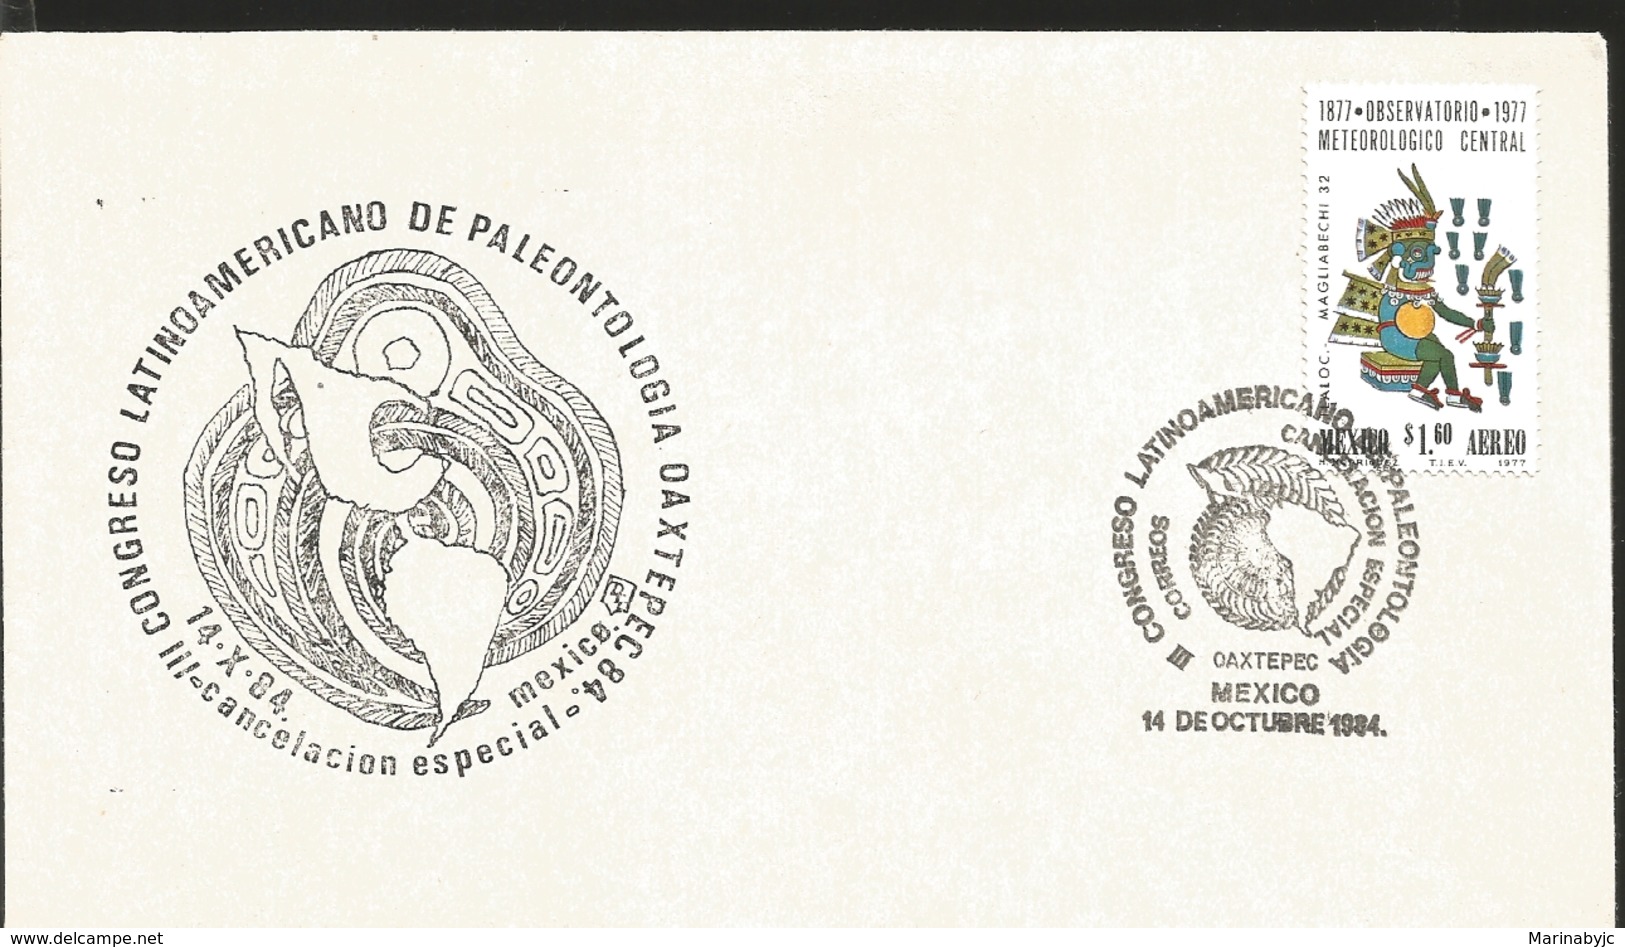 J) 1977 MEXICO, III LATIN AMERICAN CONGRESS OF PALEONTOLOGIA OAXTEPEC, CENTRAL METEOROLOGICAL OBSERVATORY, TLALOC, FDC - Mexique